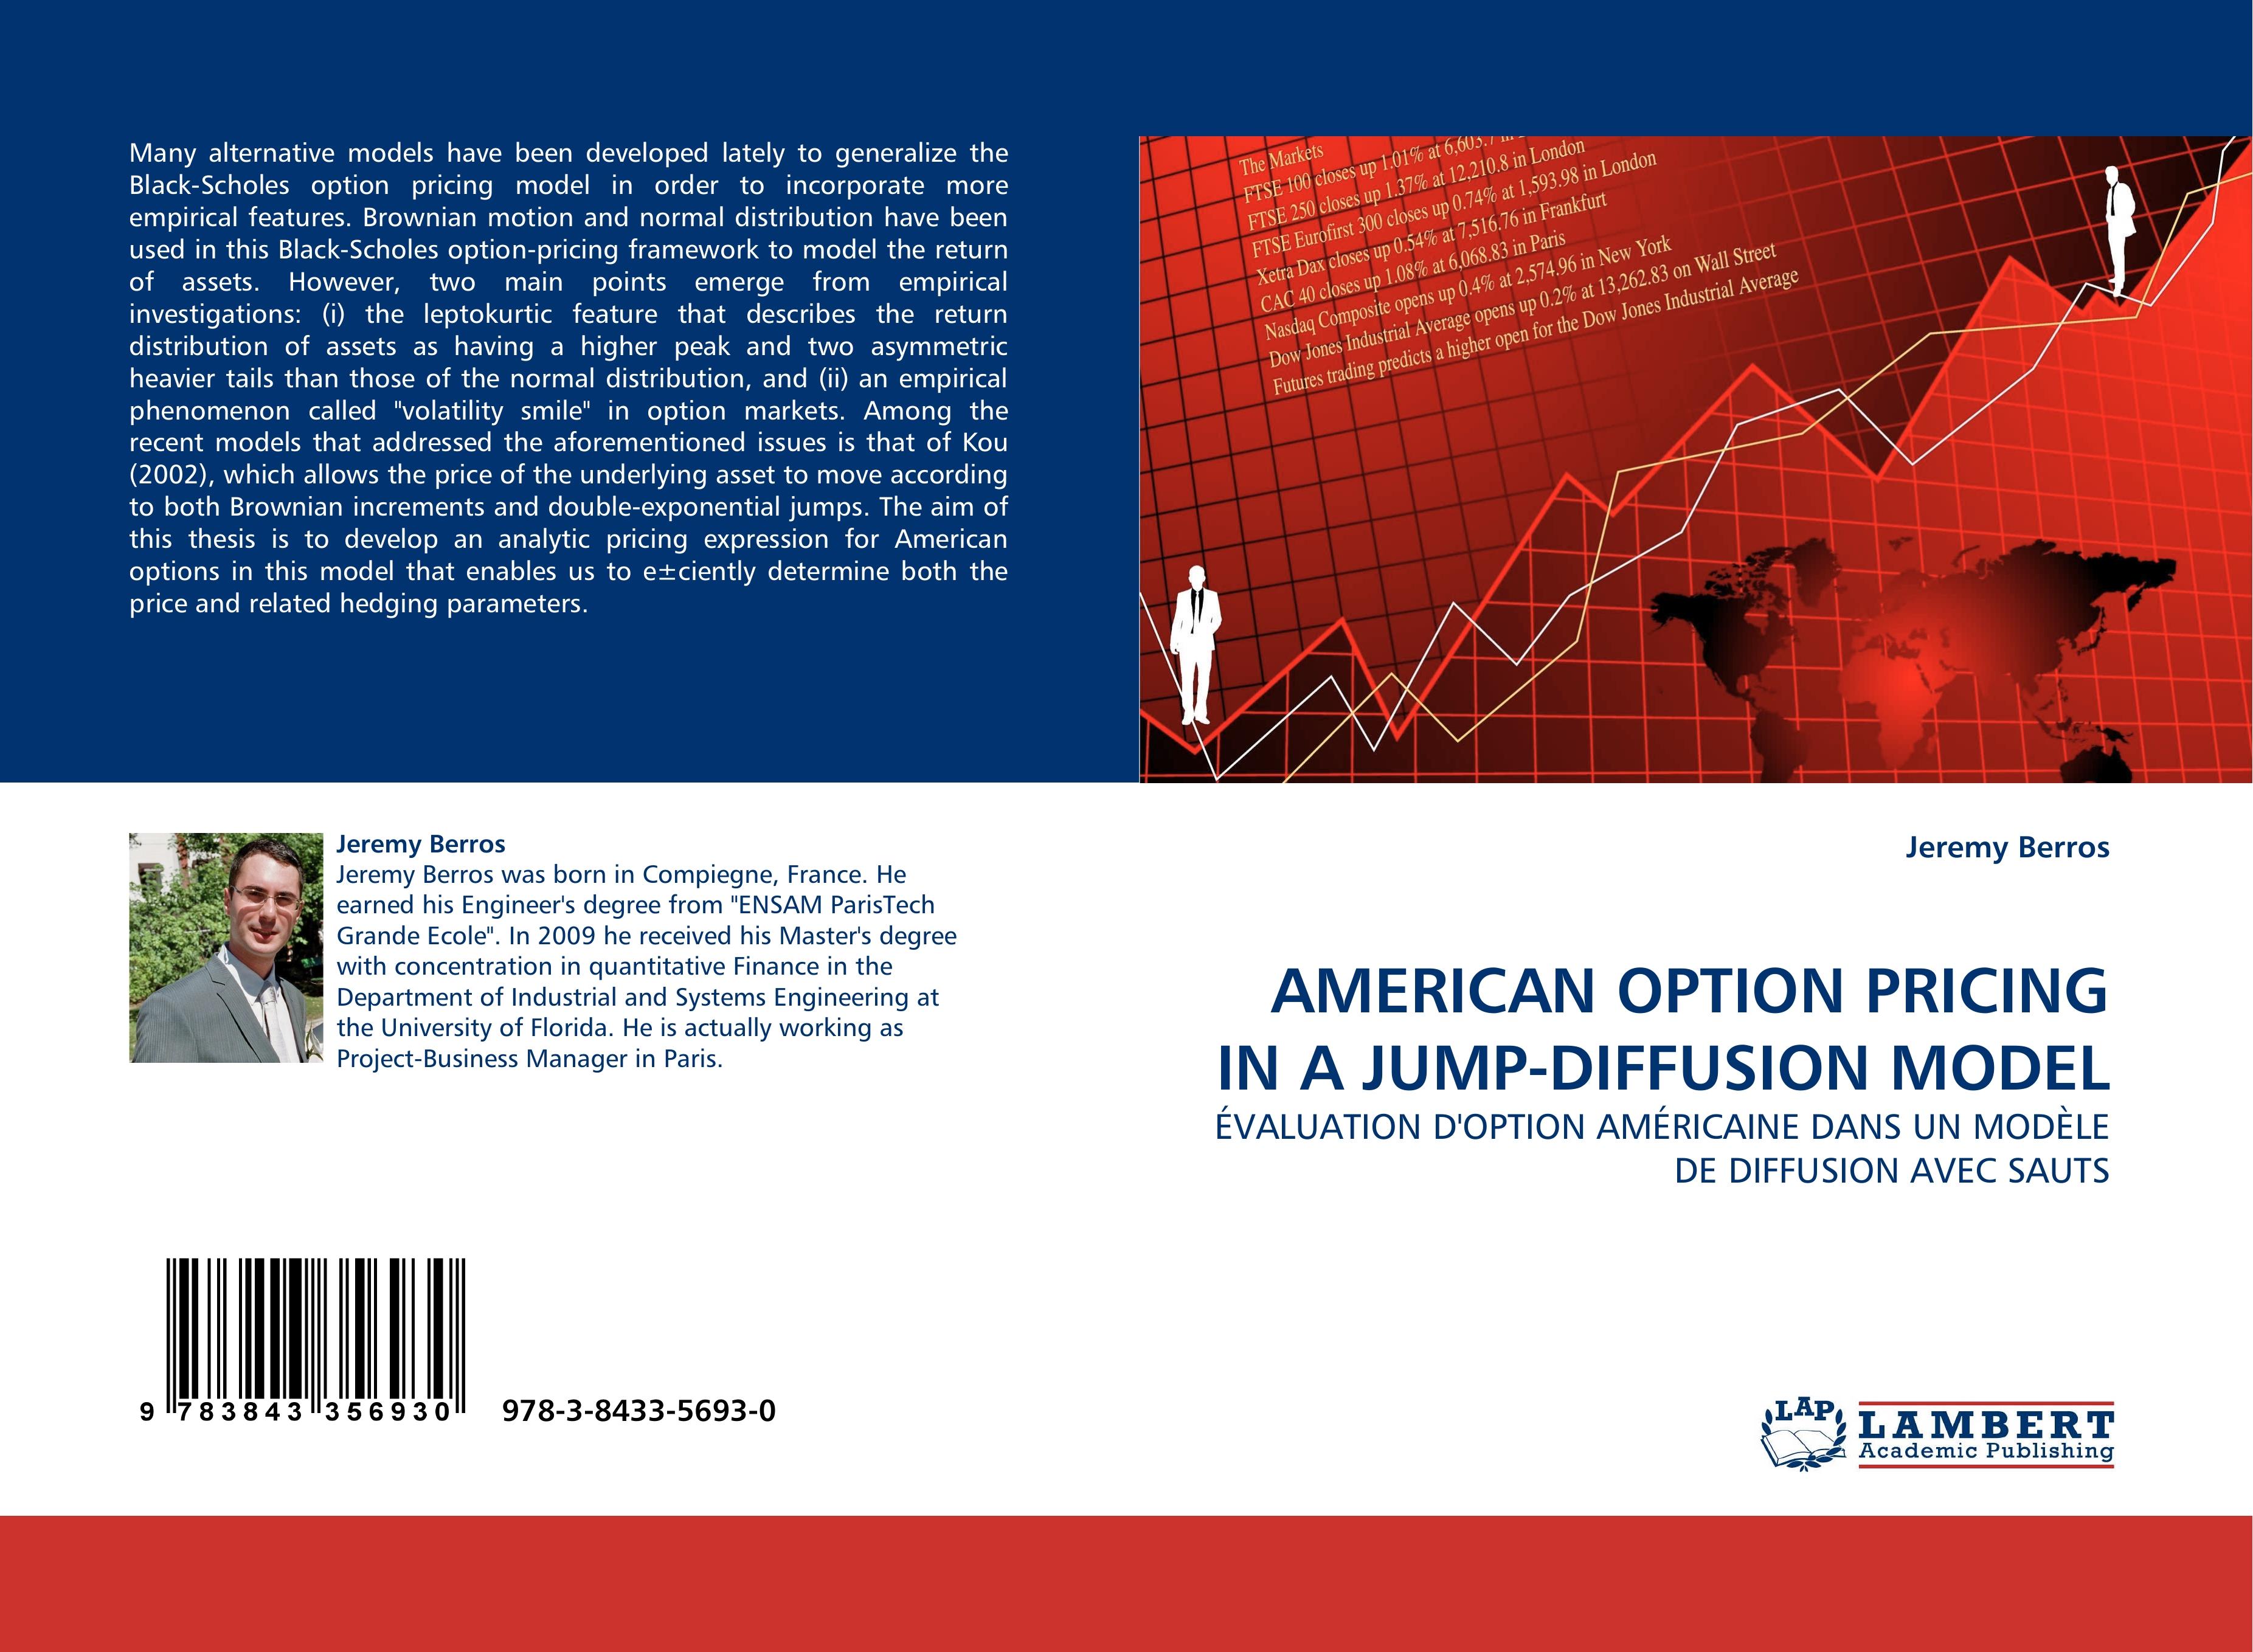 AMERICAN OPTION PRICING IN A JUMP-DIFFUSION MODEL - Jeremy Berros